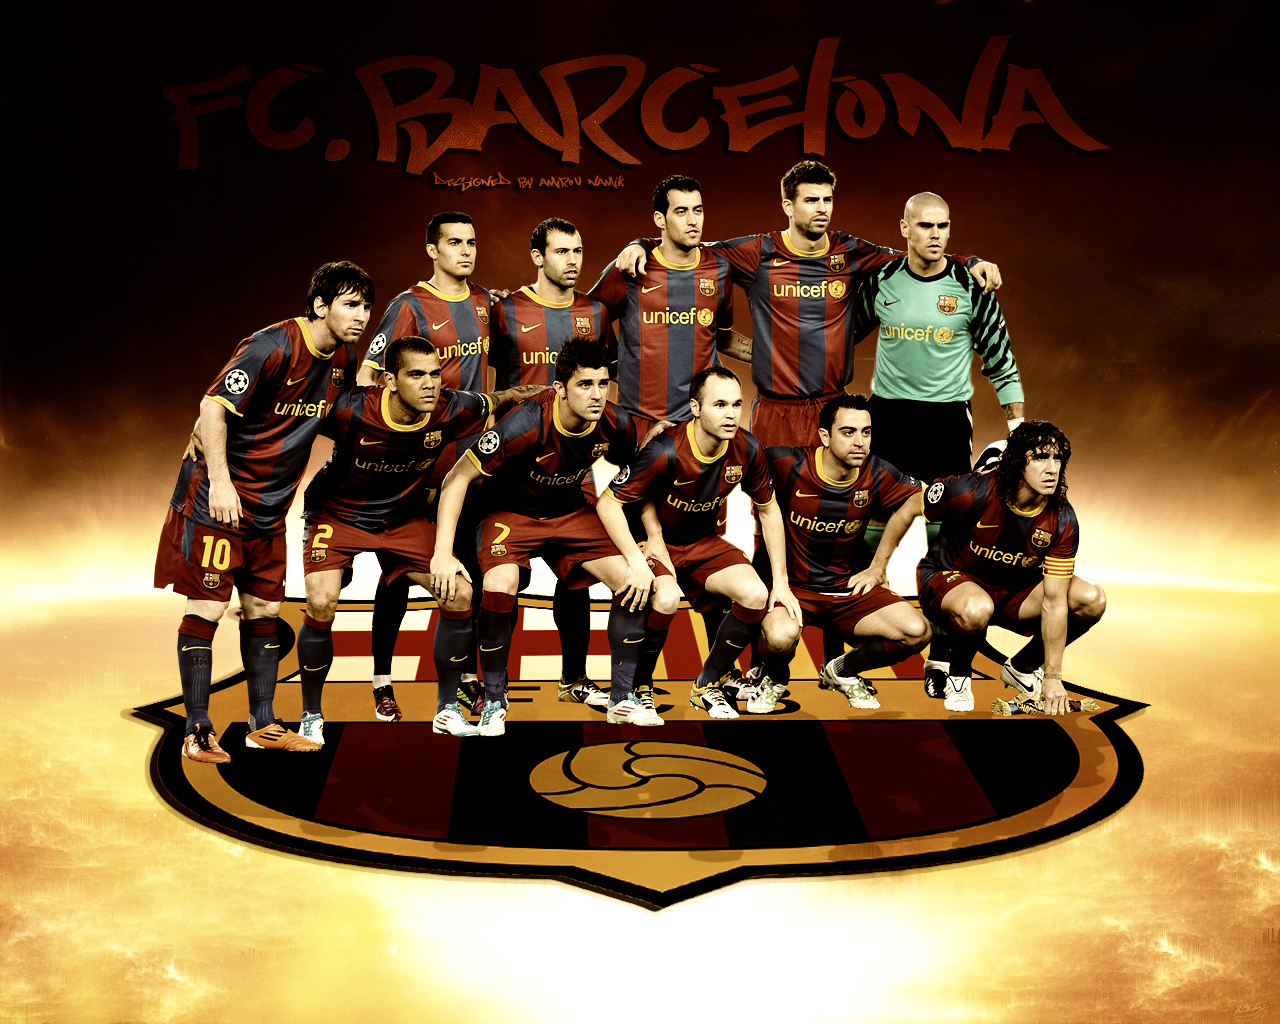 FC Barcelona Picture by Namik Amirov